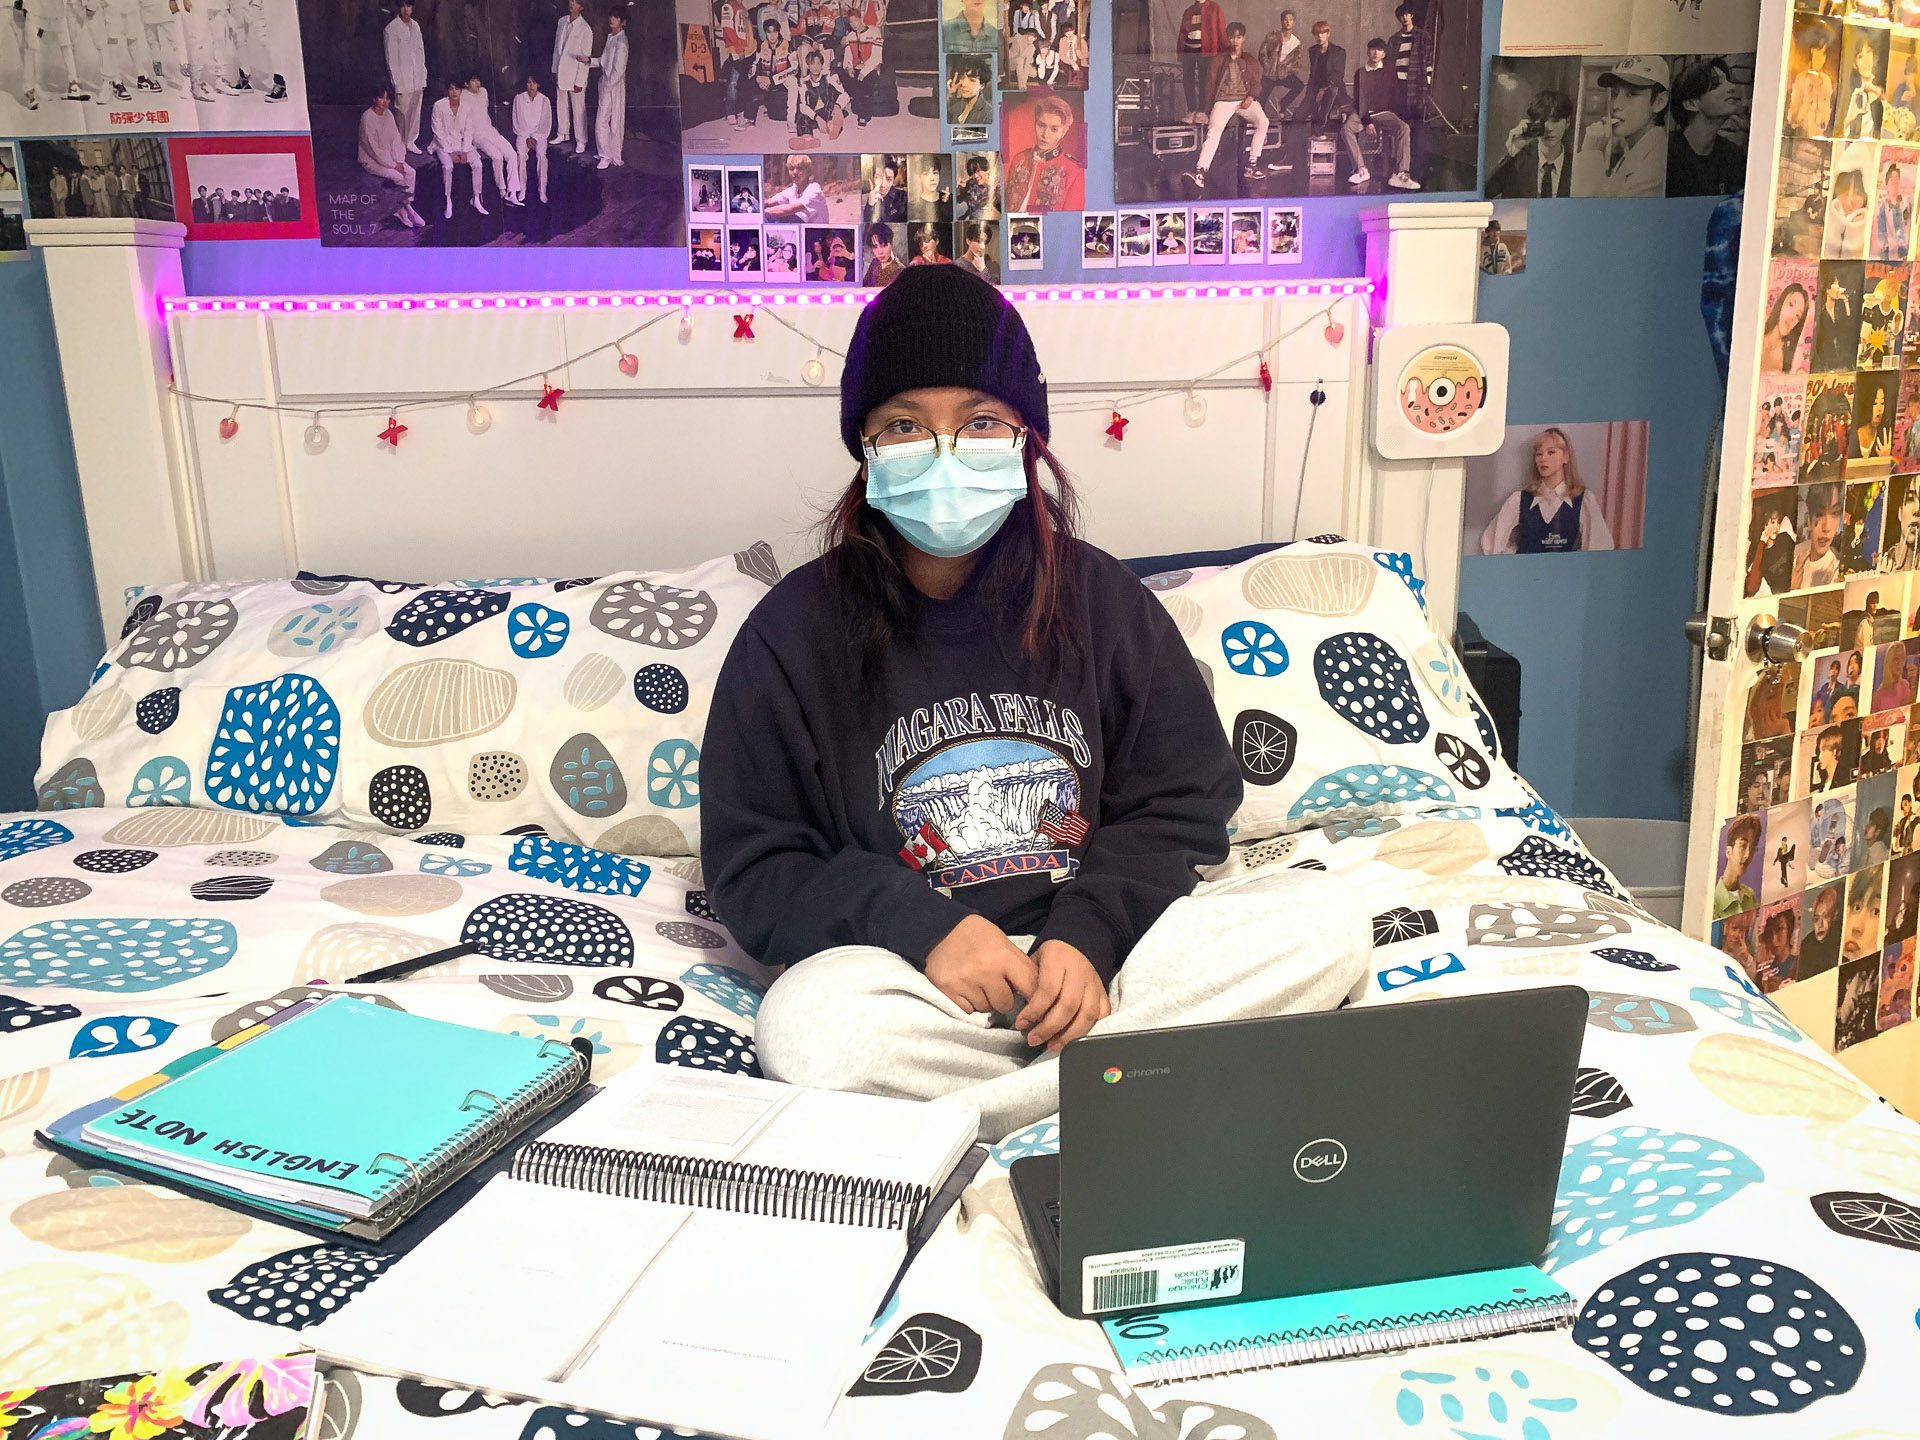 CPS student Gisselle Baltazar doing homework at home while class is canceled during COVID surge